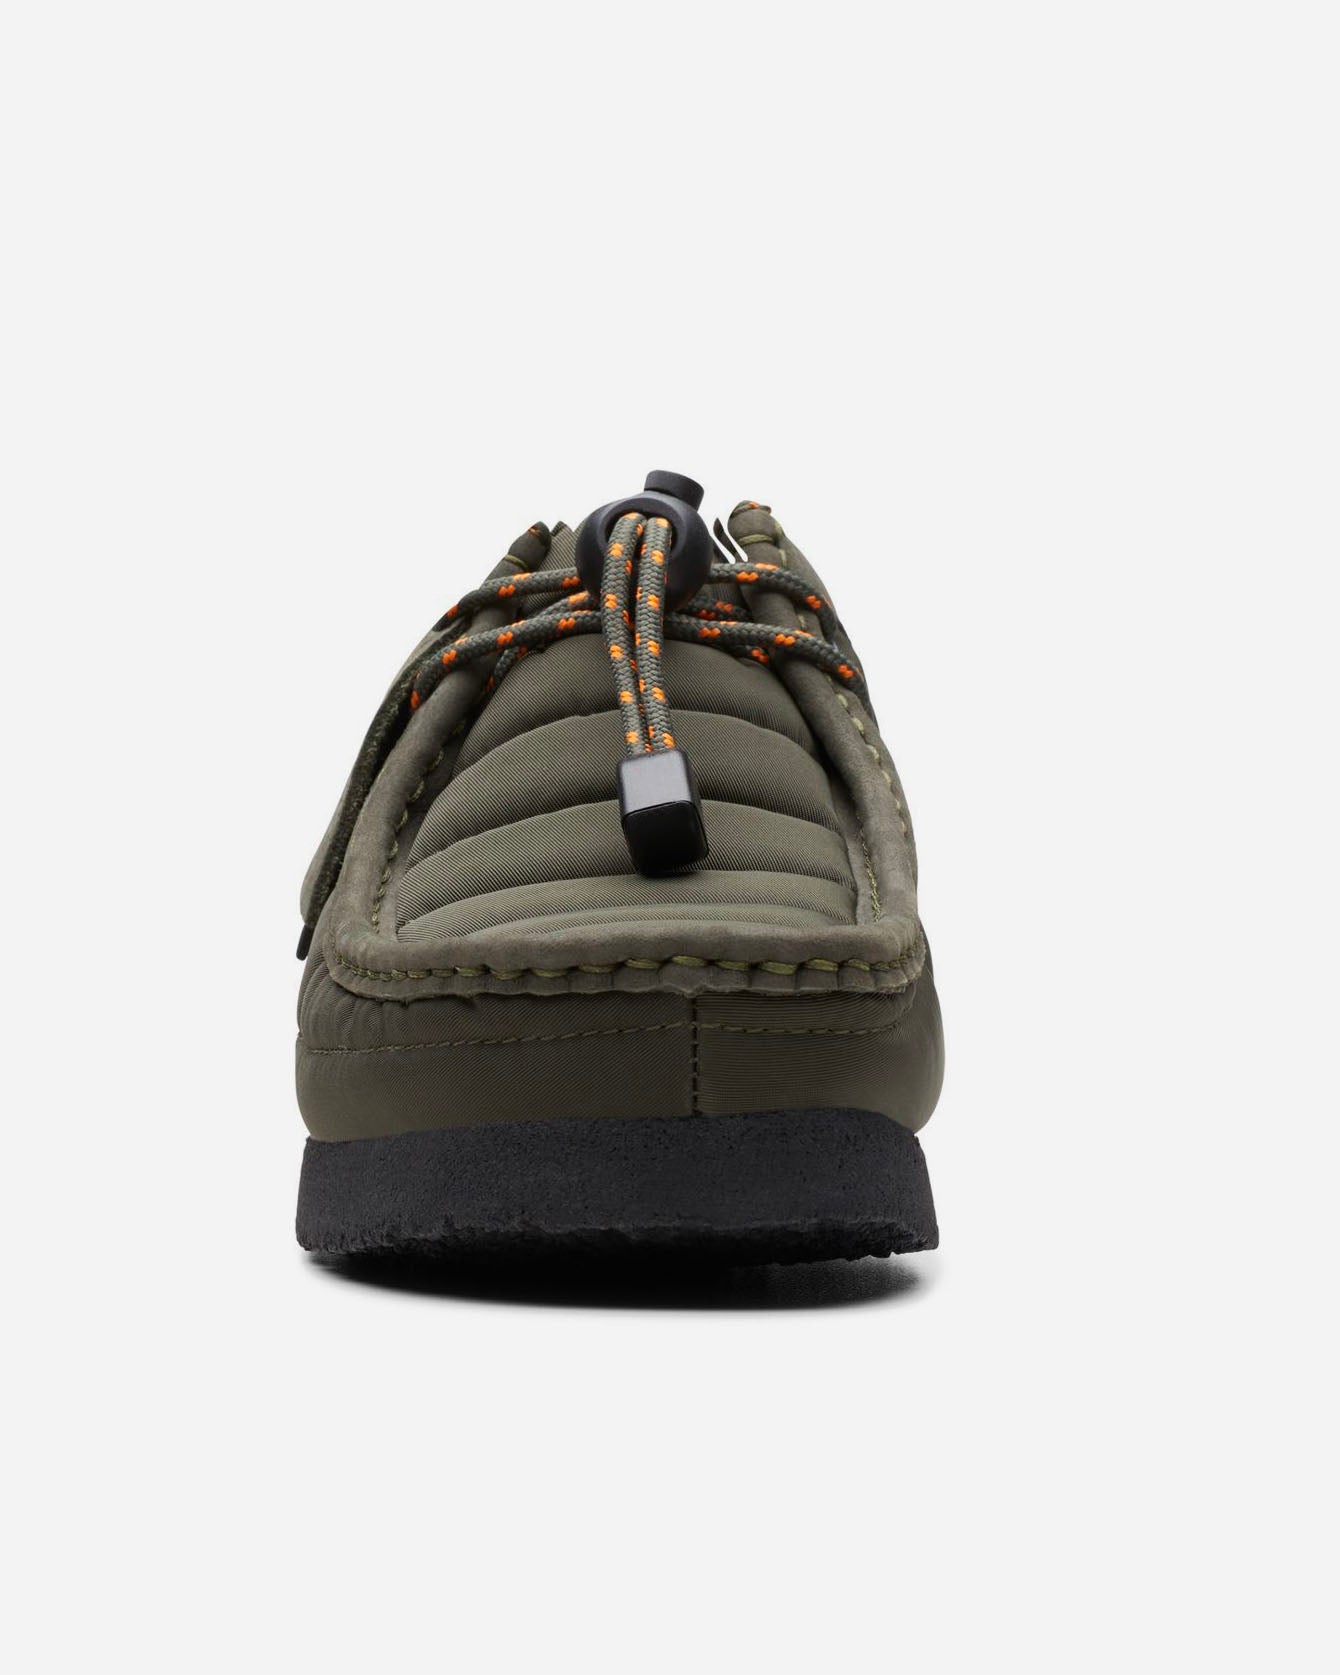 Wallabee Khaki Quilted